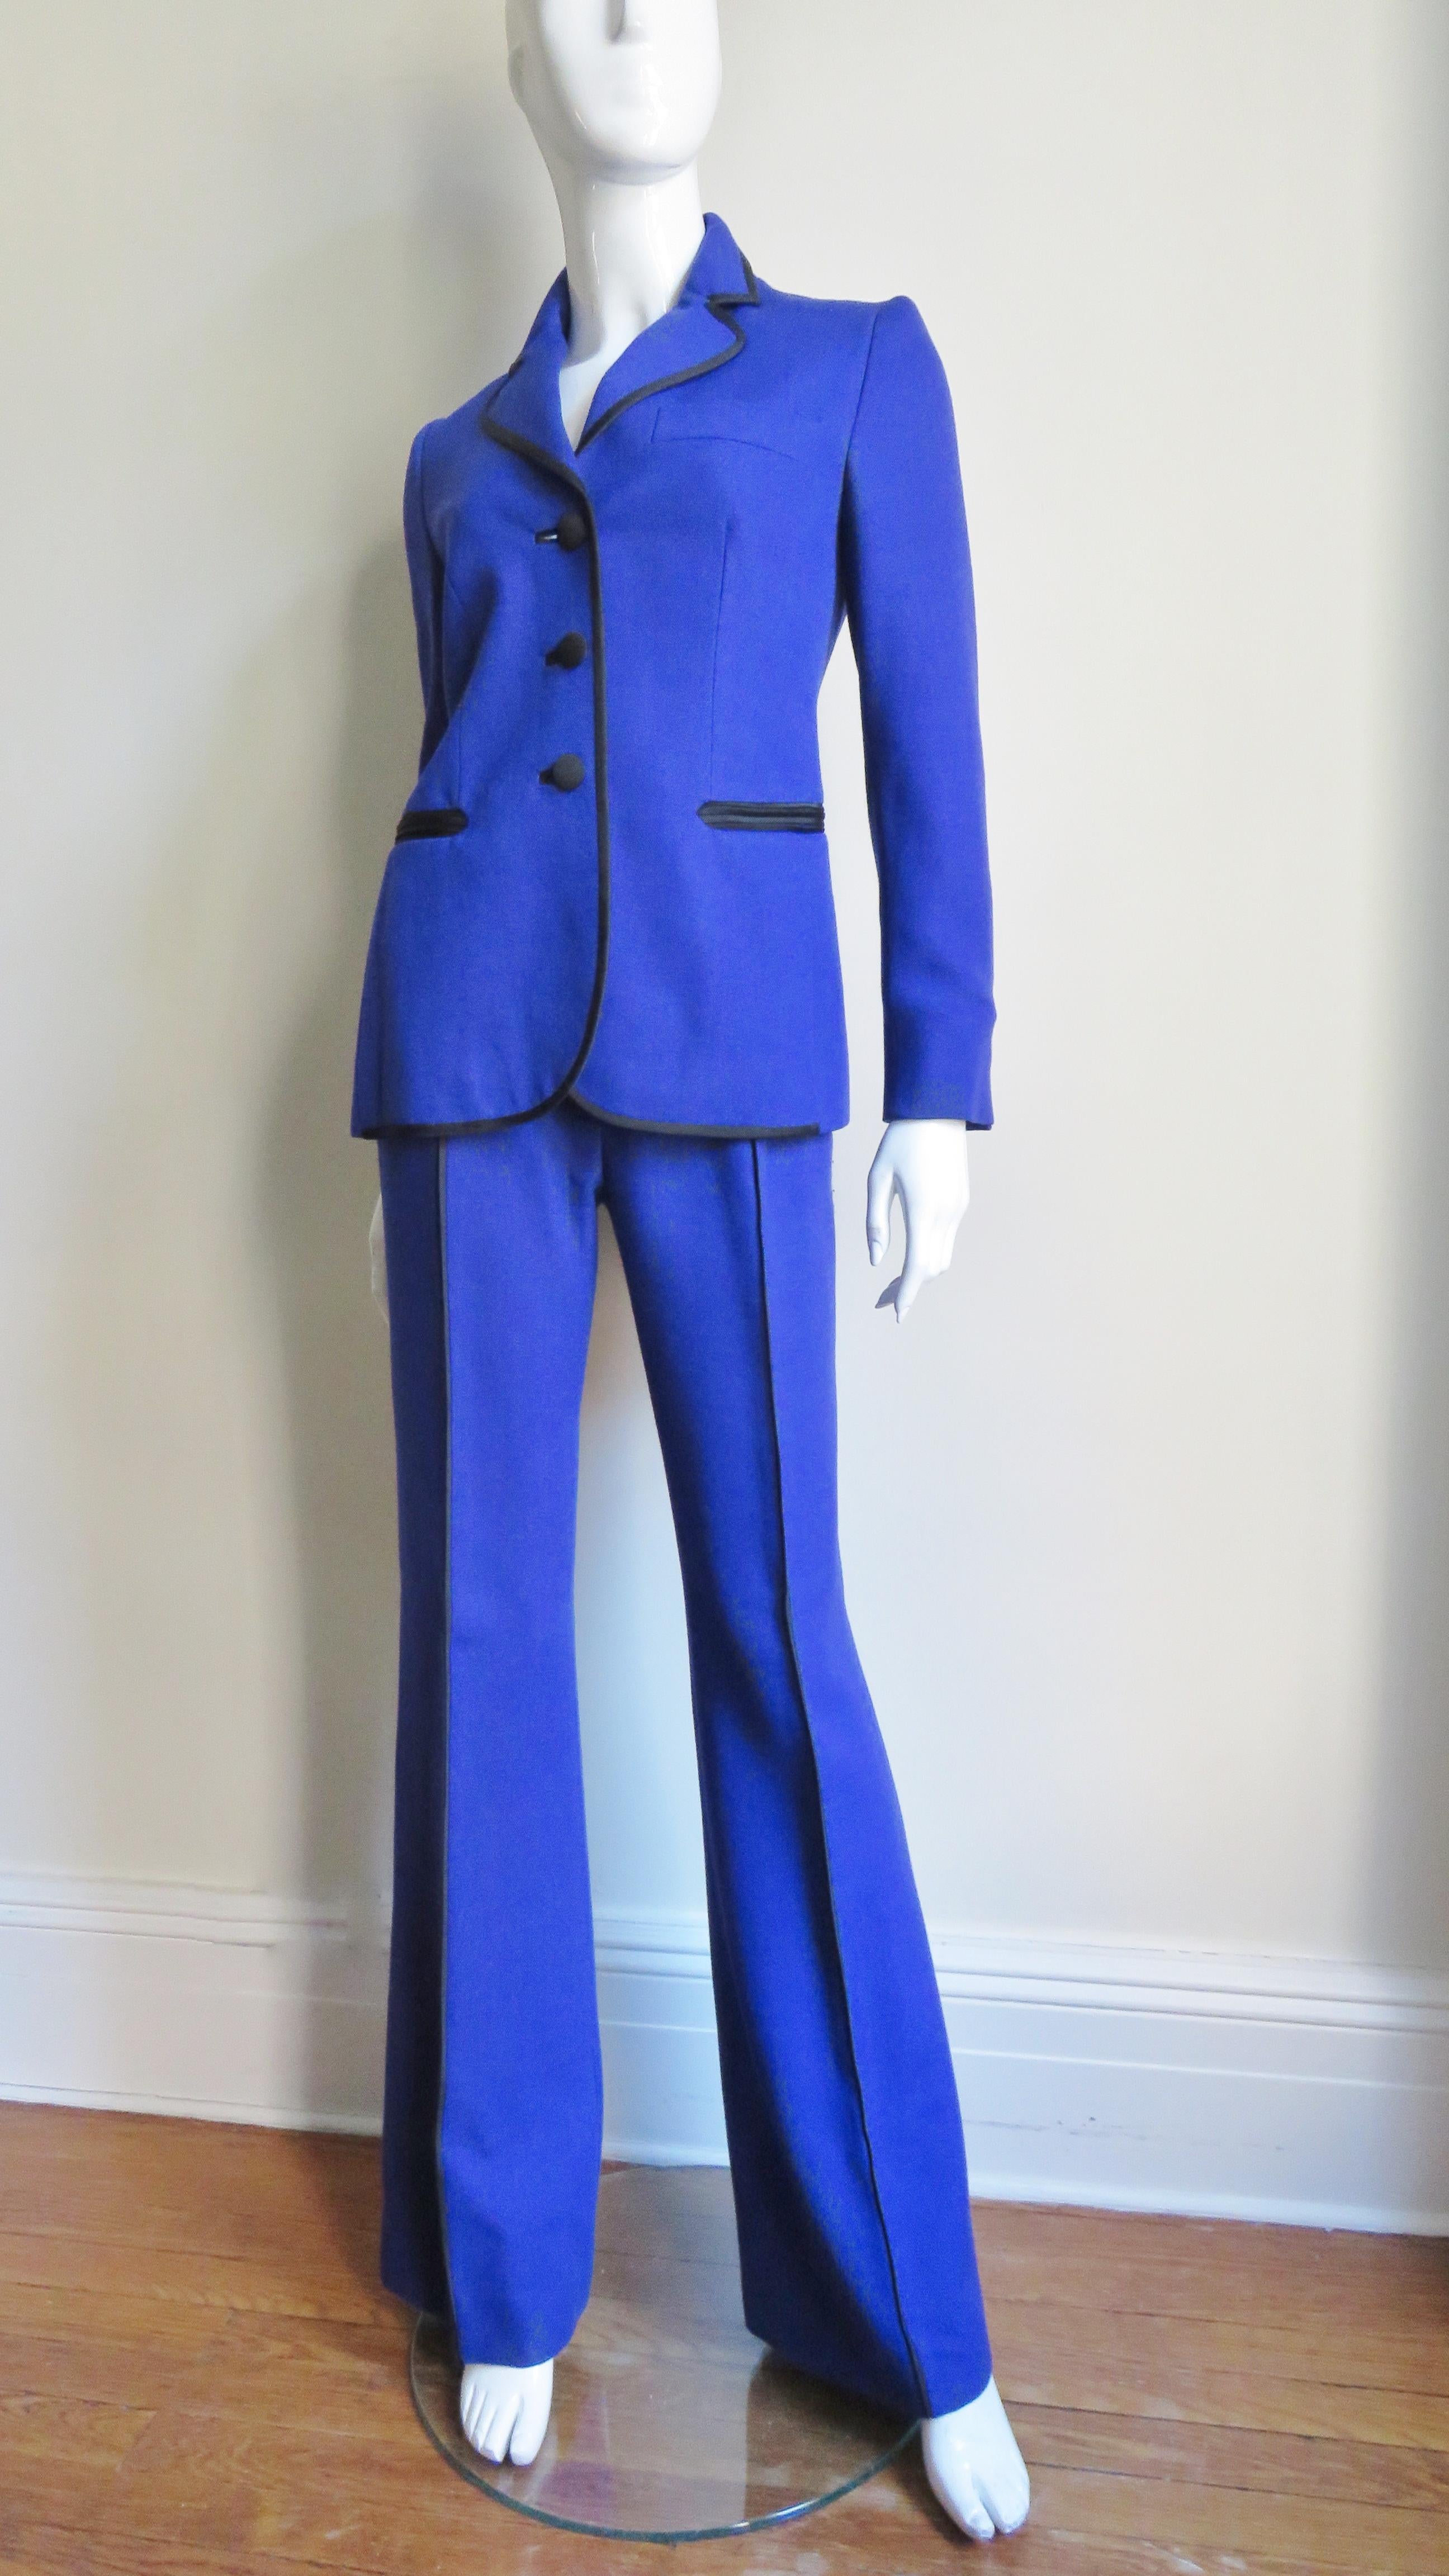 Moschino Color Block Pantsuit with Applique Eyes Collar In Good Condition For Sale In Water Mill, NY